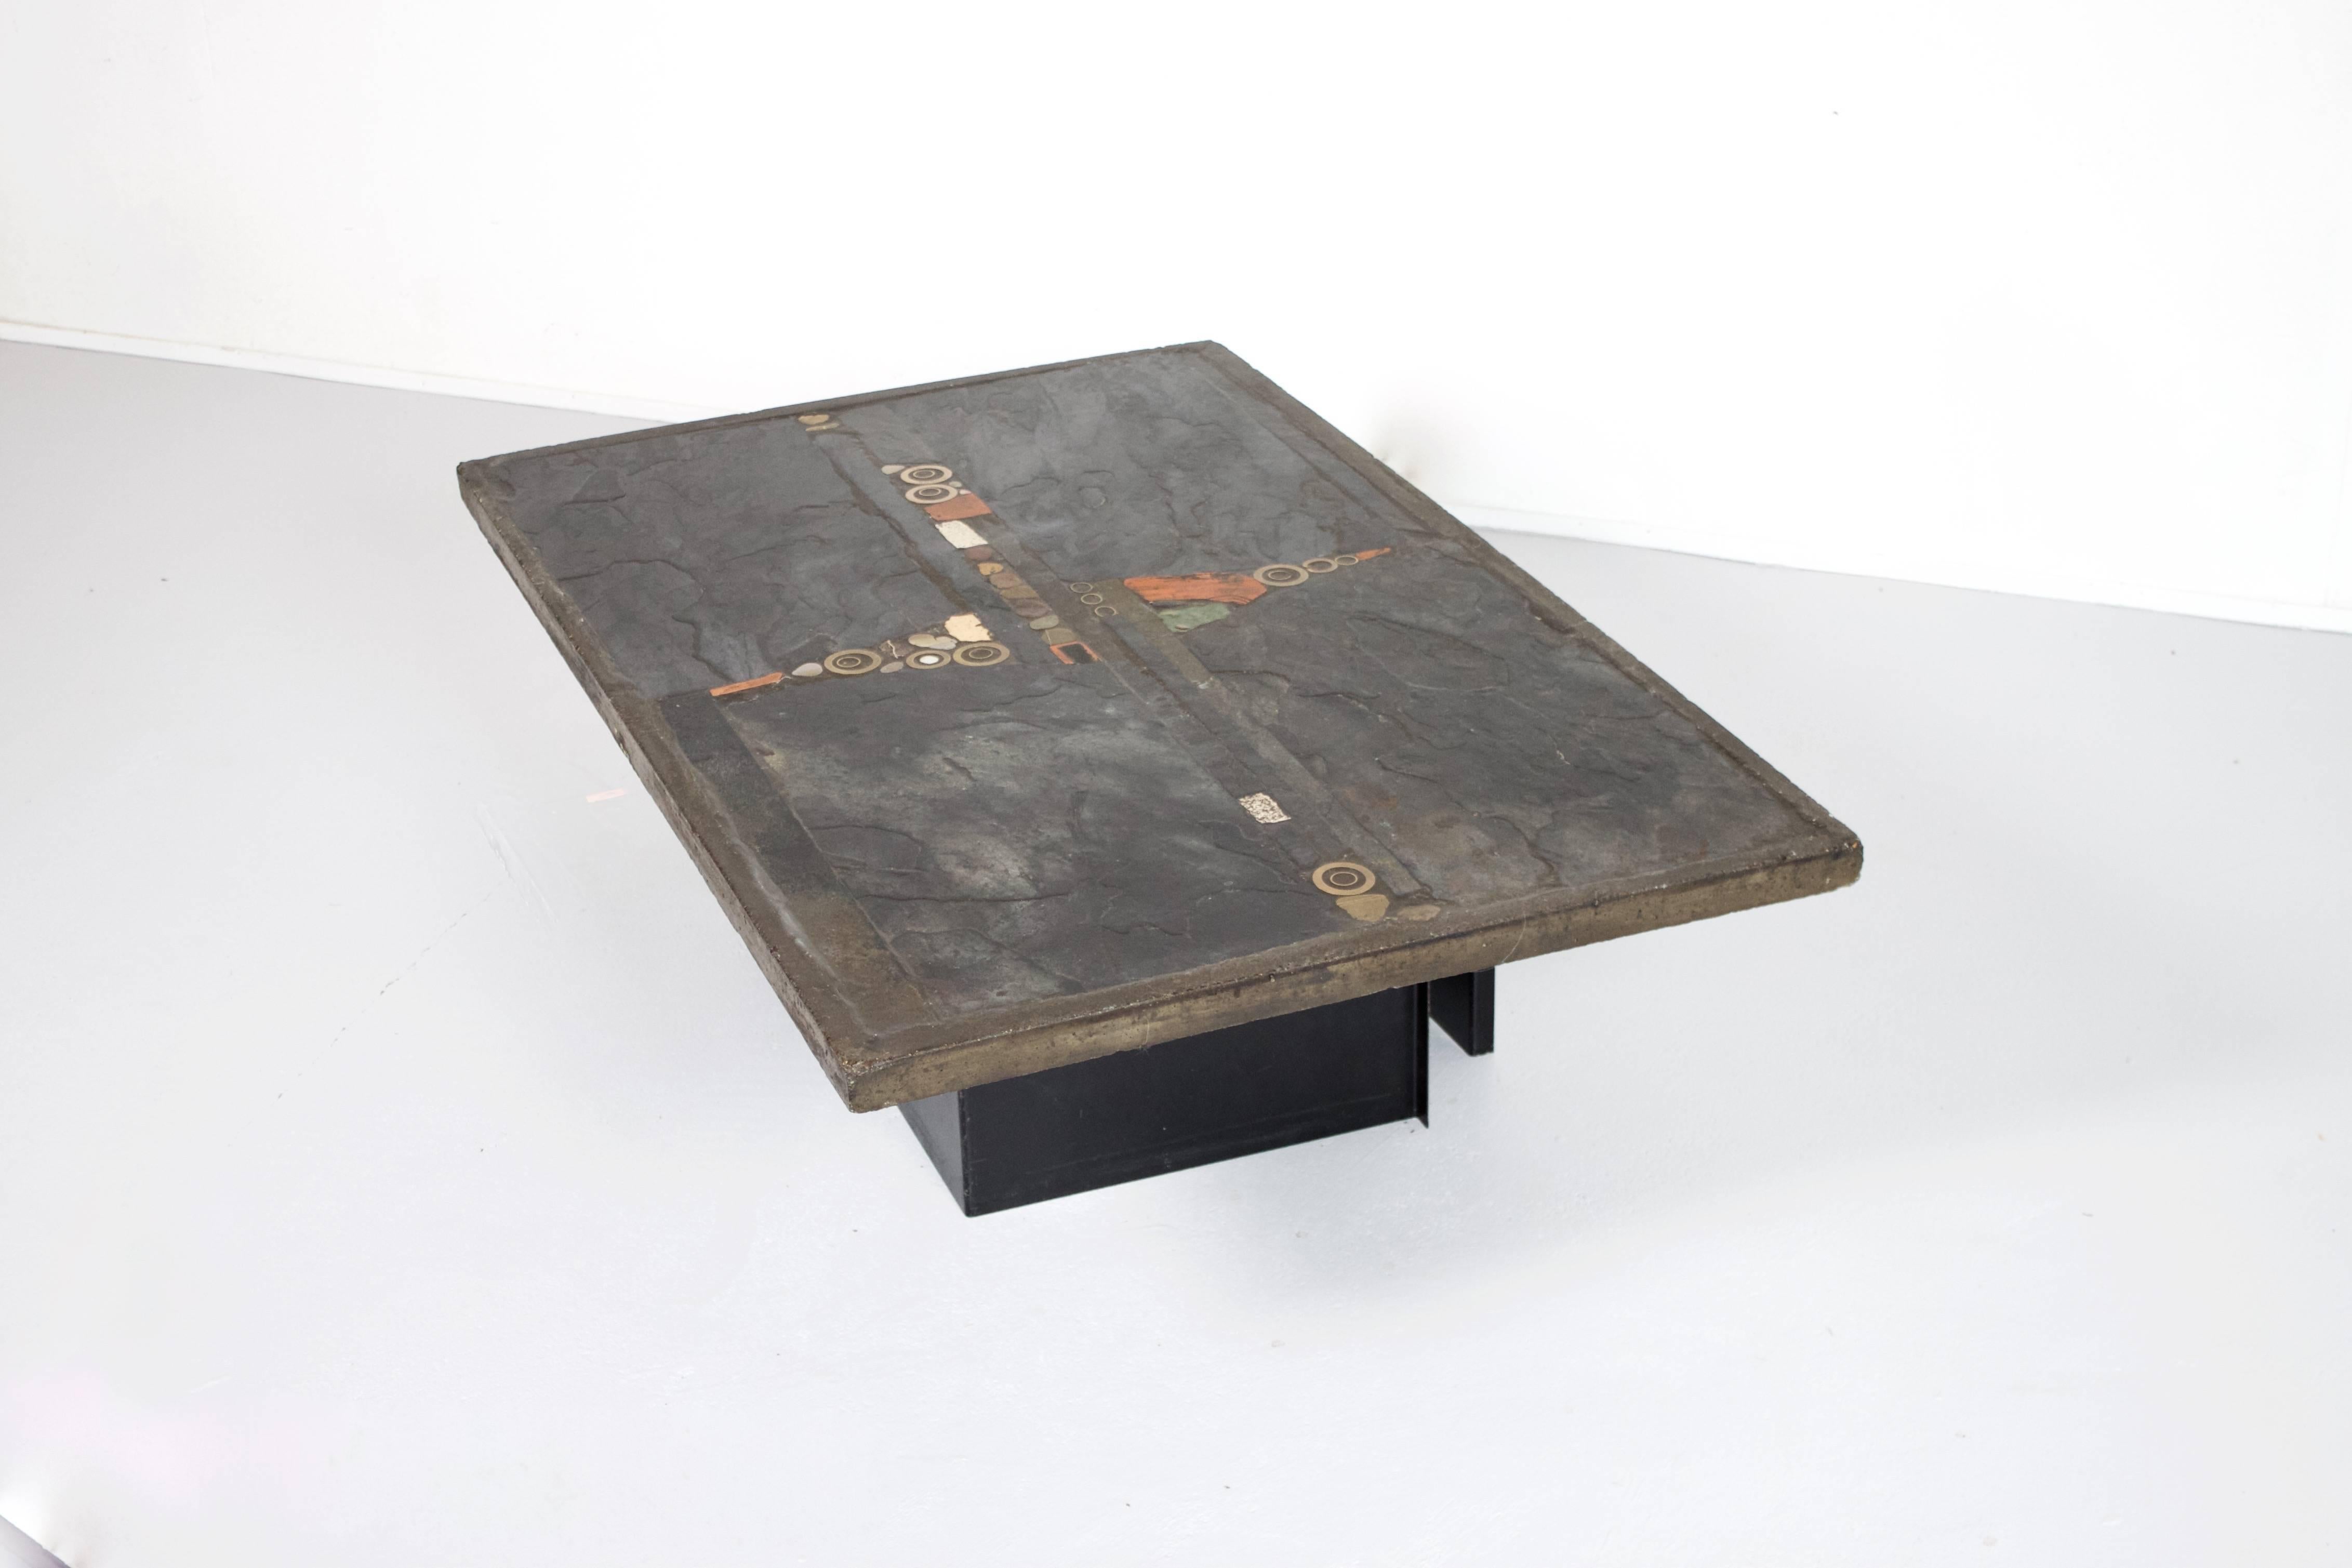 Unique Brutalist coffee table by the Dutch sculptor Paul Kingma.

The tabletop is a mosaic of slate panels, colored stones and brass details.

The table is signed by the artist in a brass ring inserted into the tabletop.

The base consists of